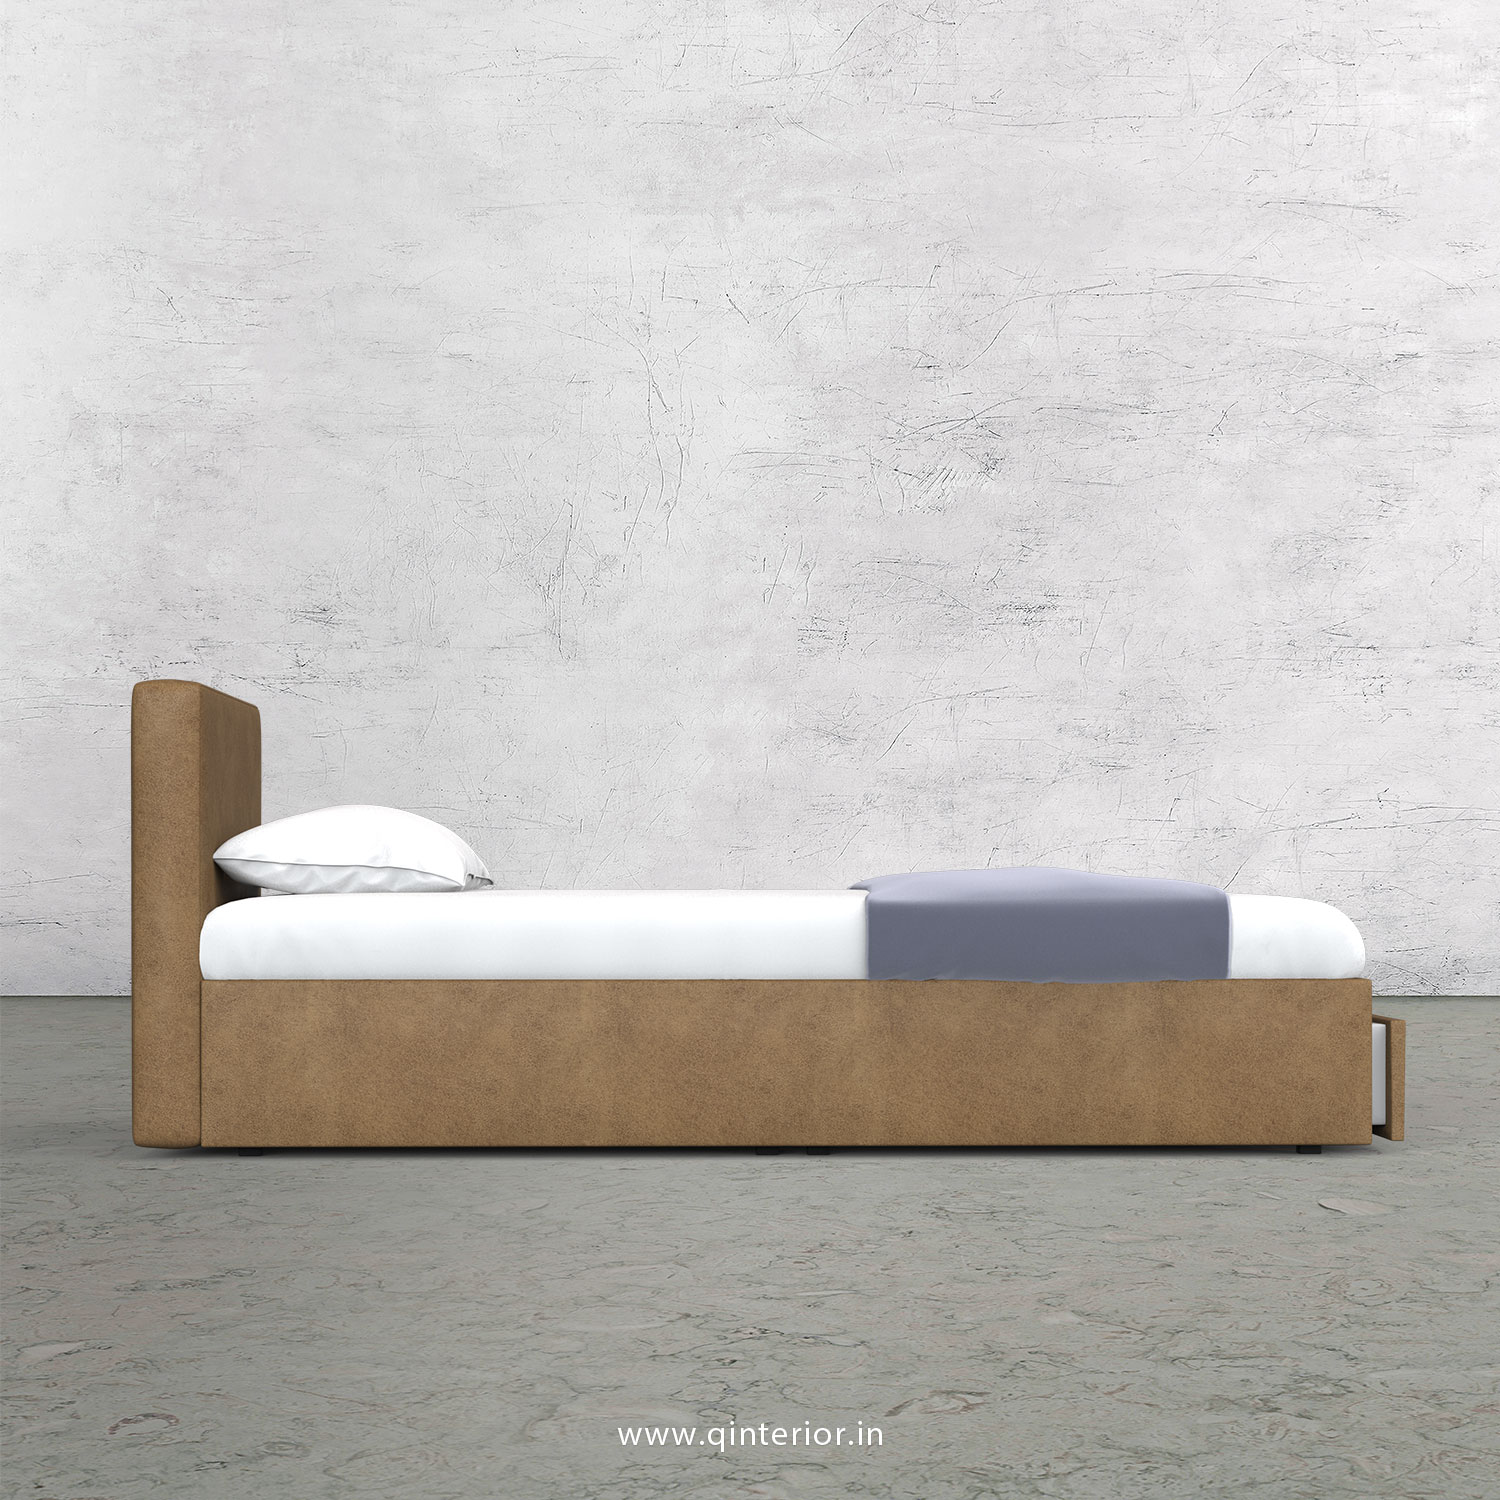 Nirvana King Size Storage Bed in Fab Leather Fabric - KBD001 FL02